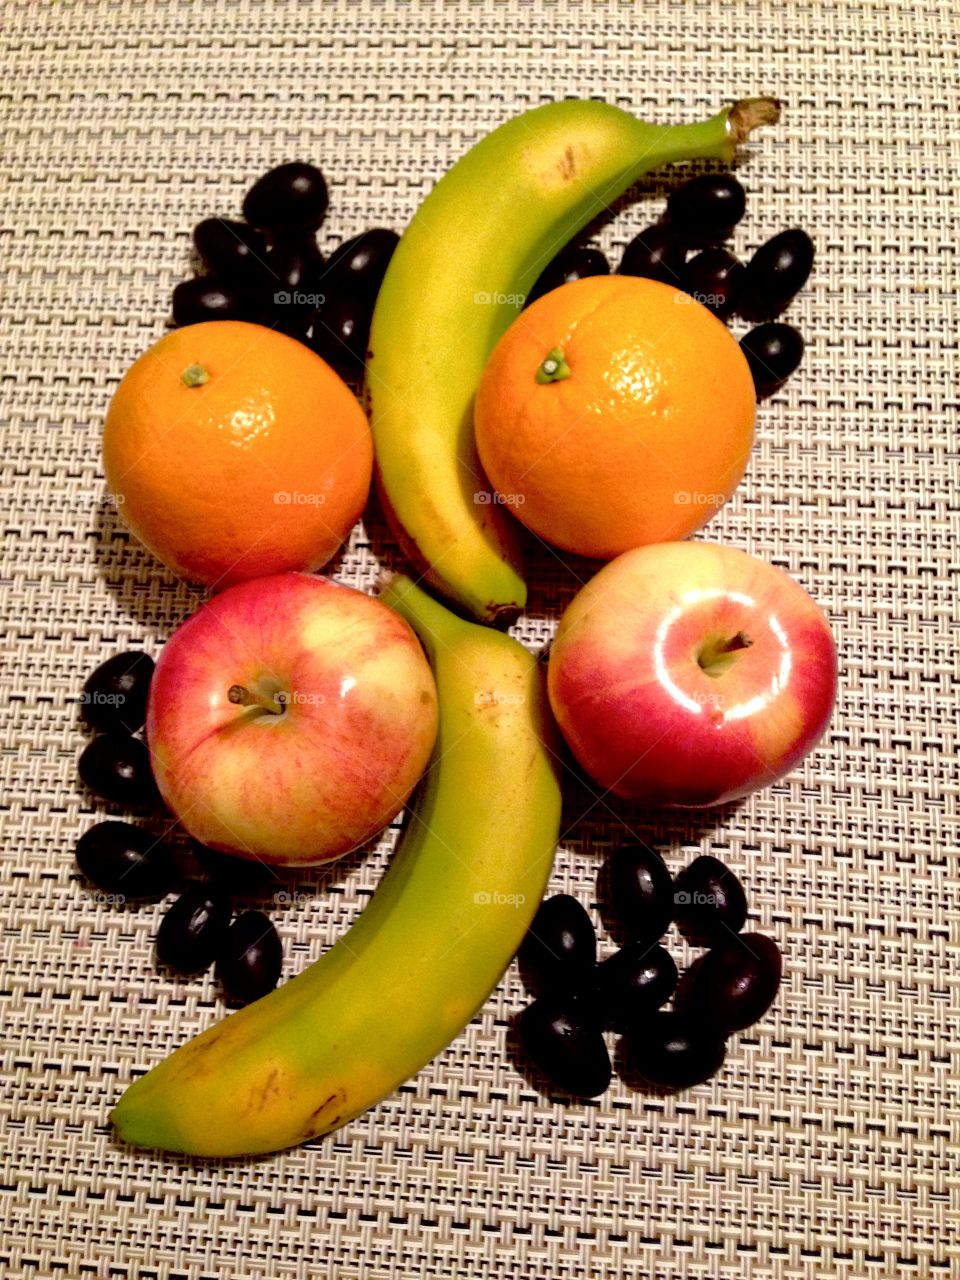 Delicious Assorted Fruits

Published by:
HappyBrownMonkey 